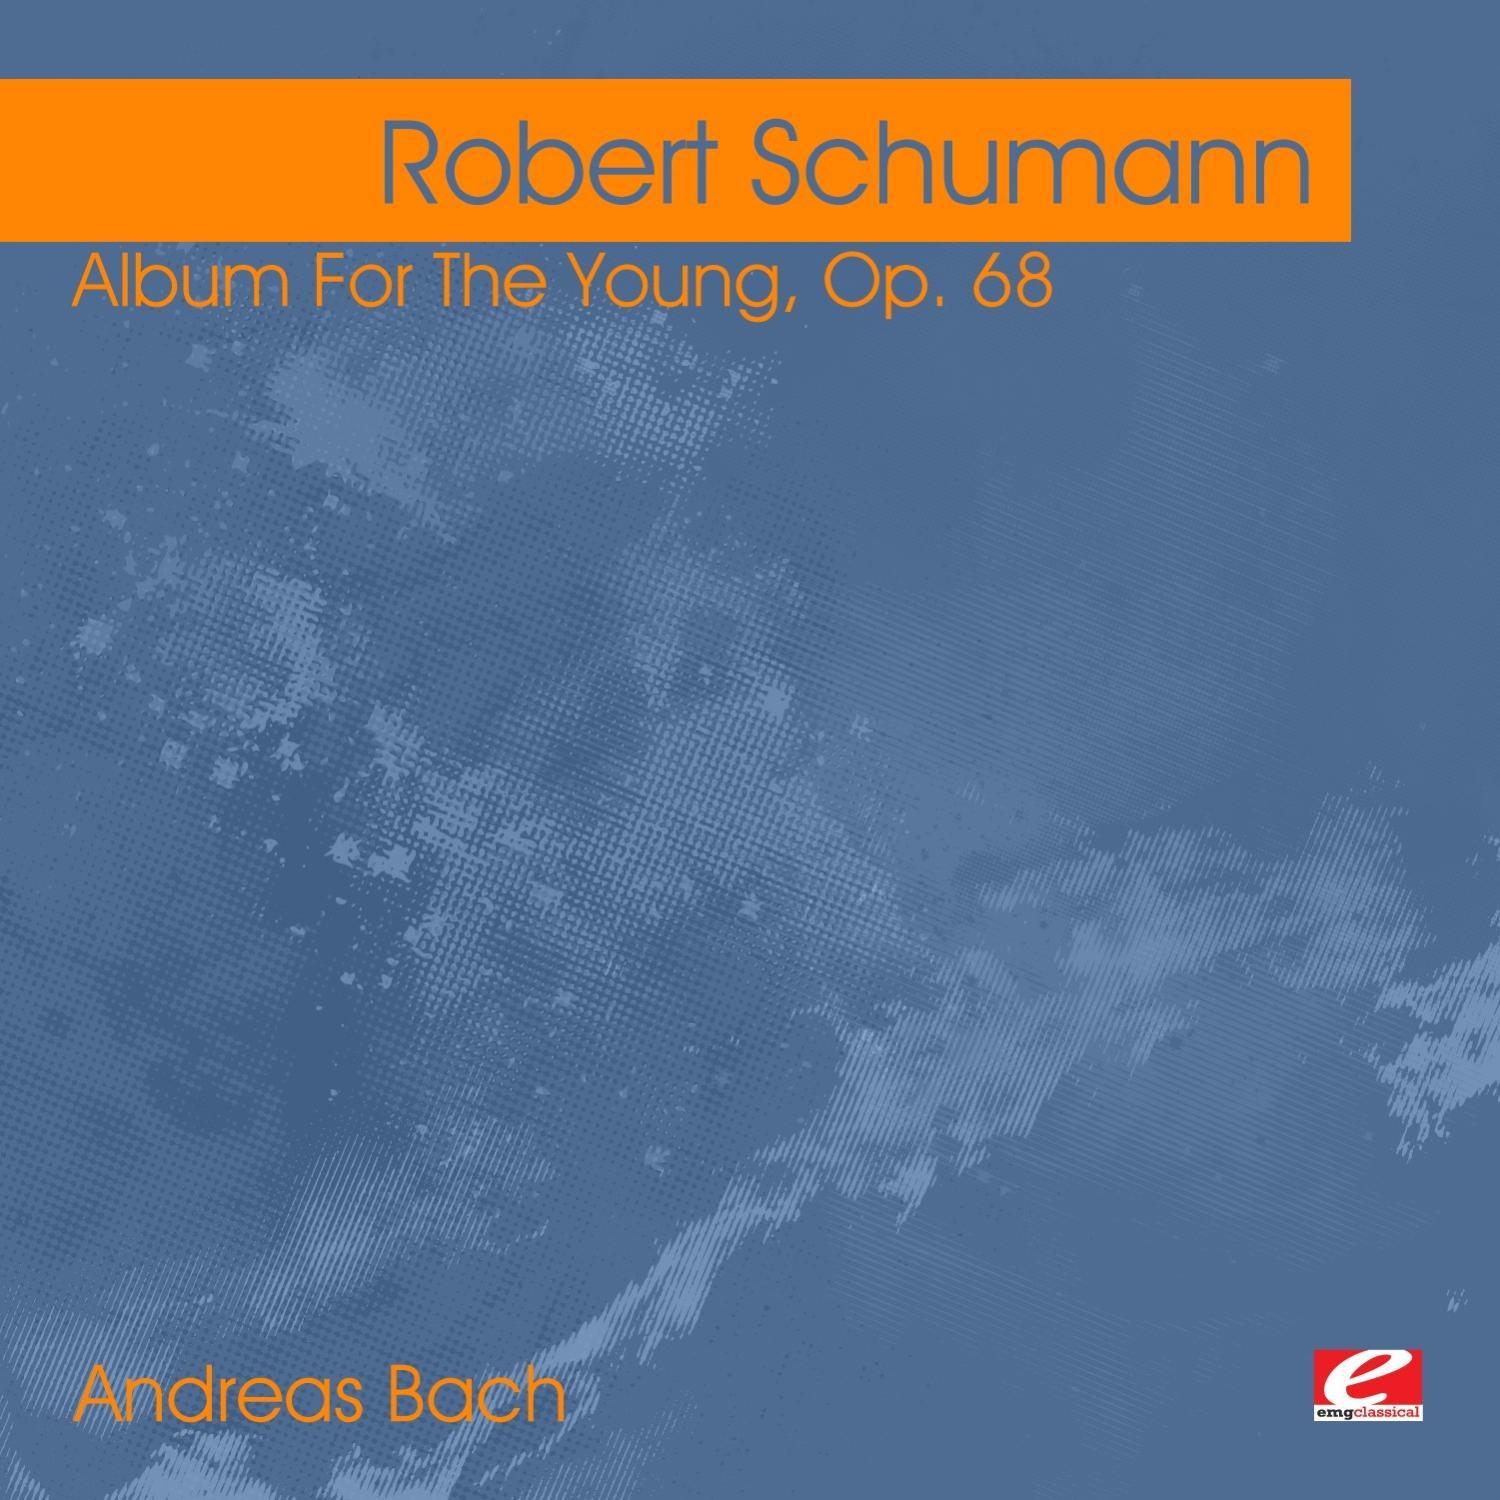 Schumann: Album For The Young, Op. 68 (Digitally Remastered)